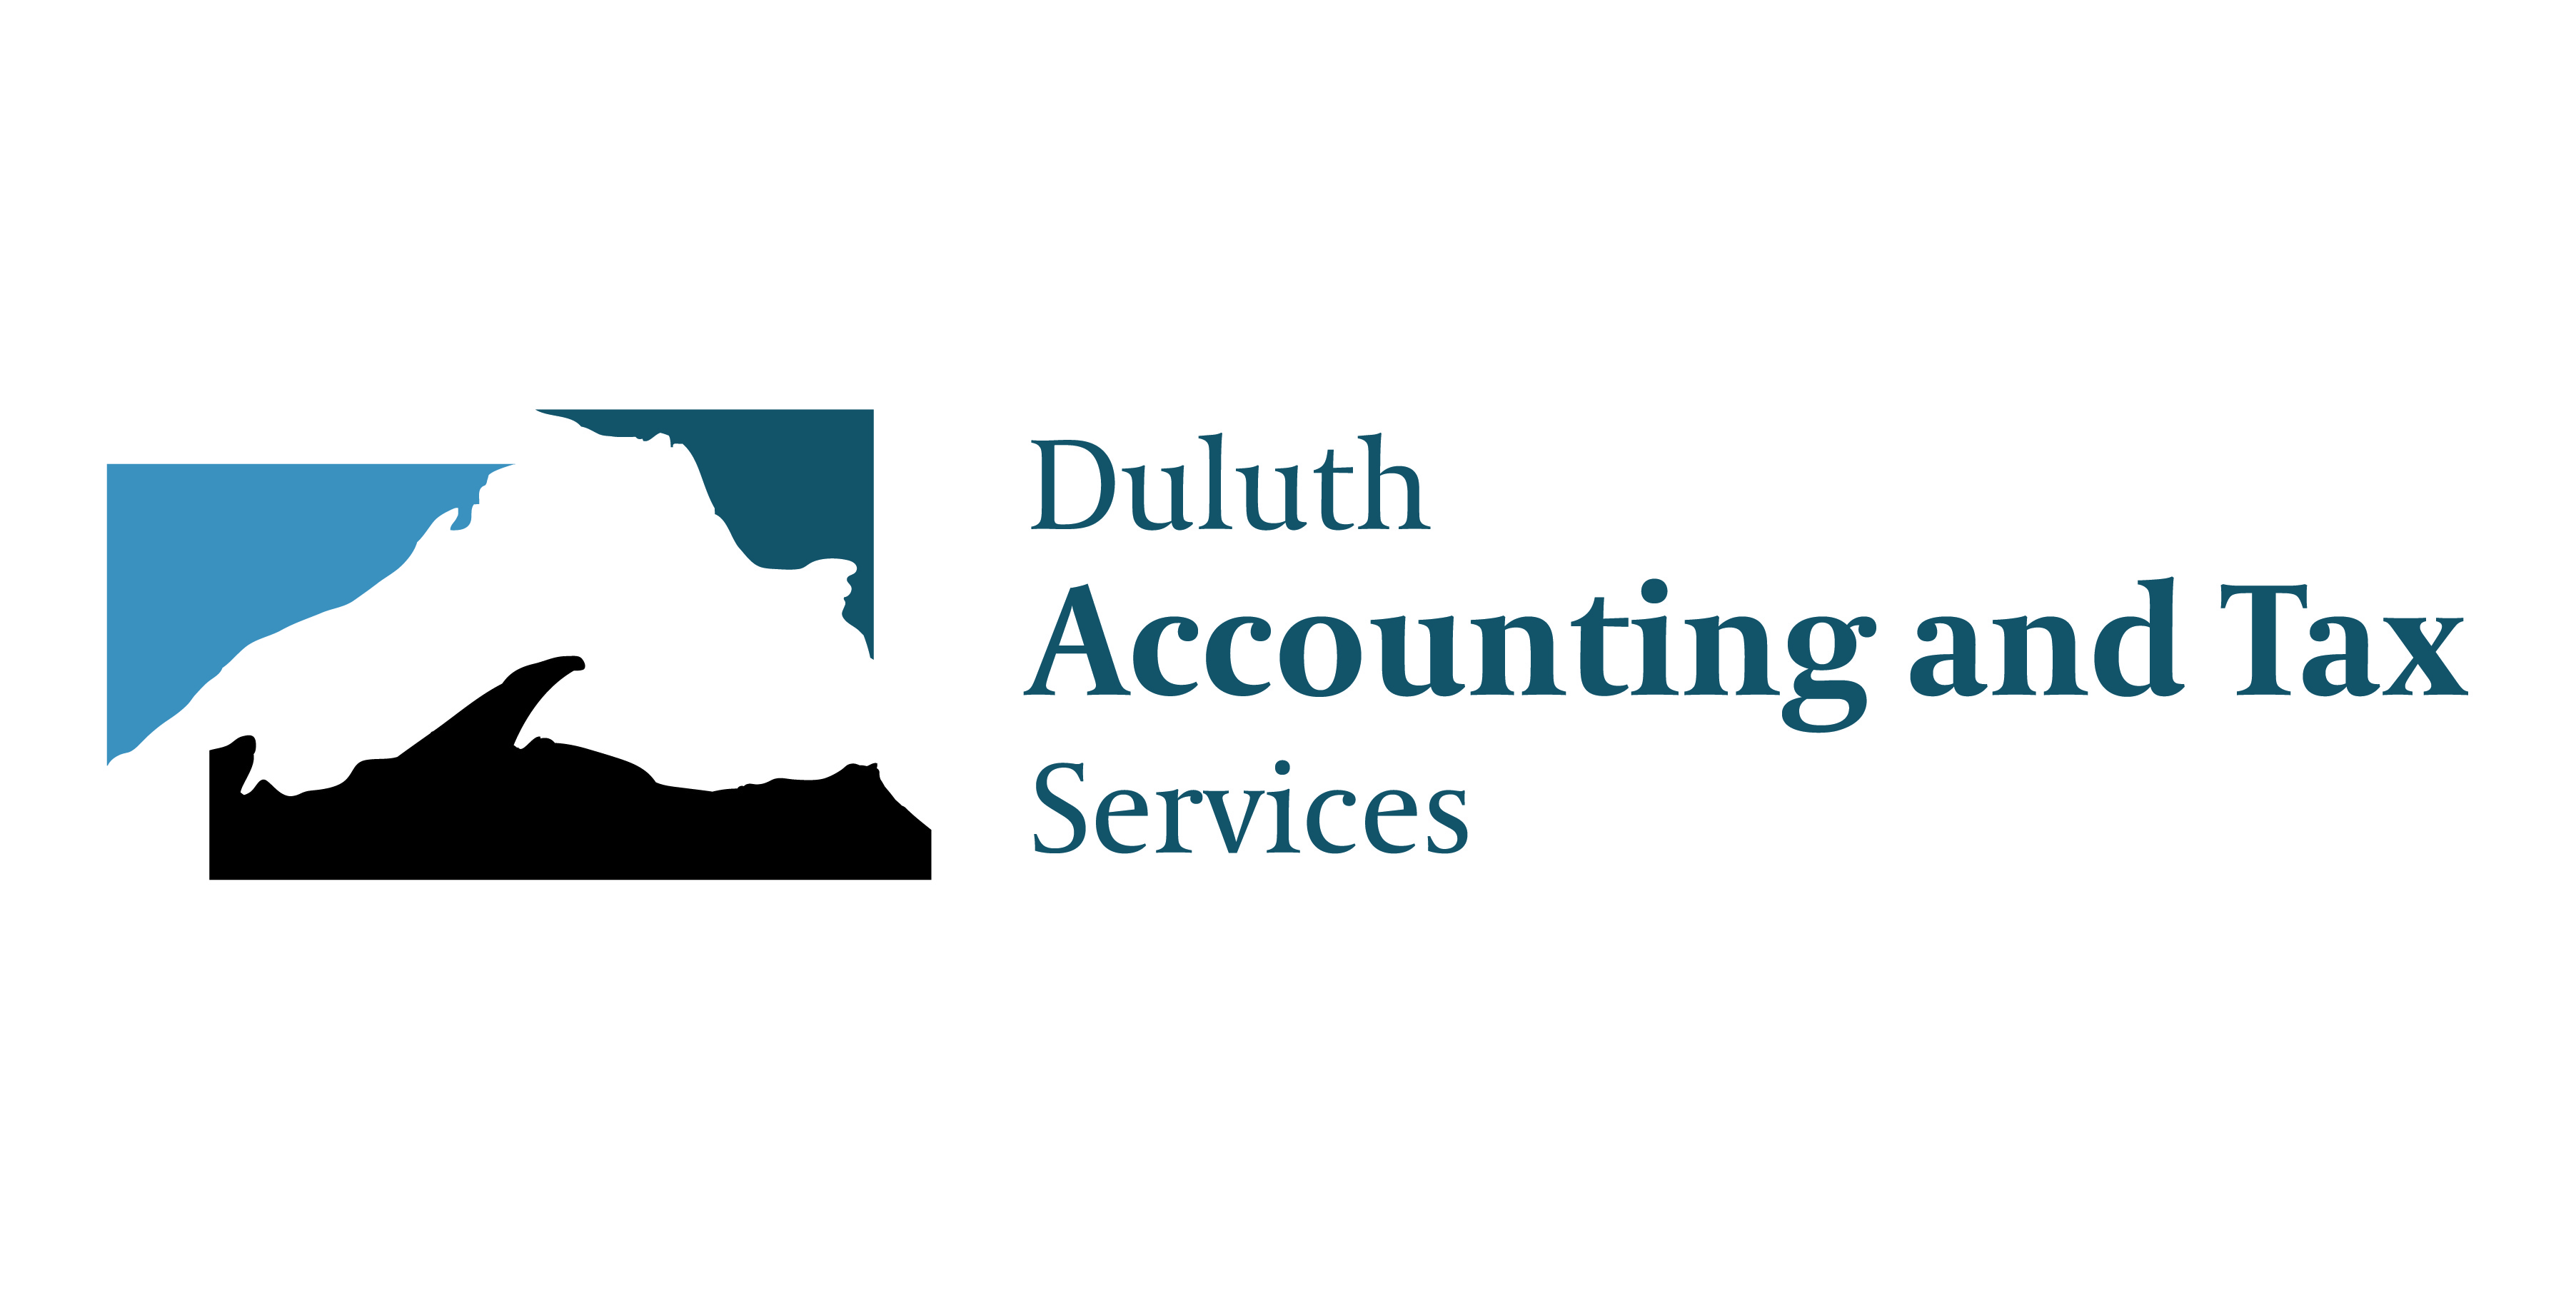 Duluth Accounting and Tax Services LLC